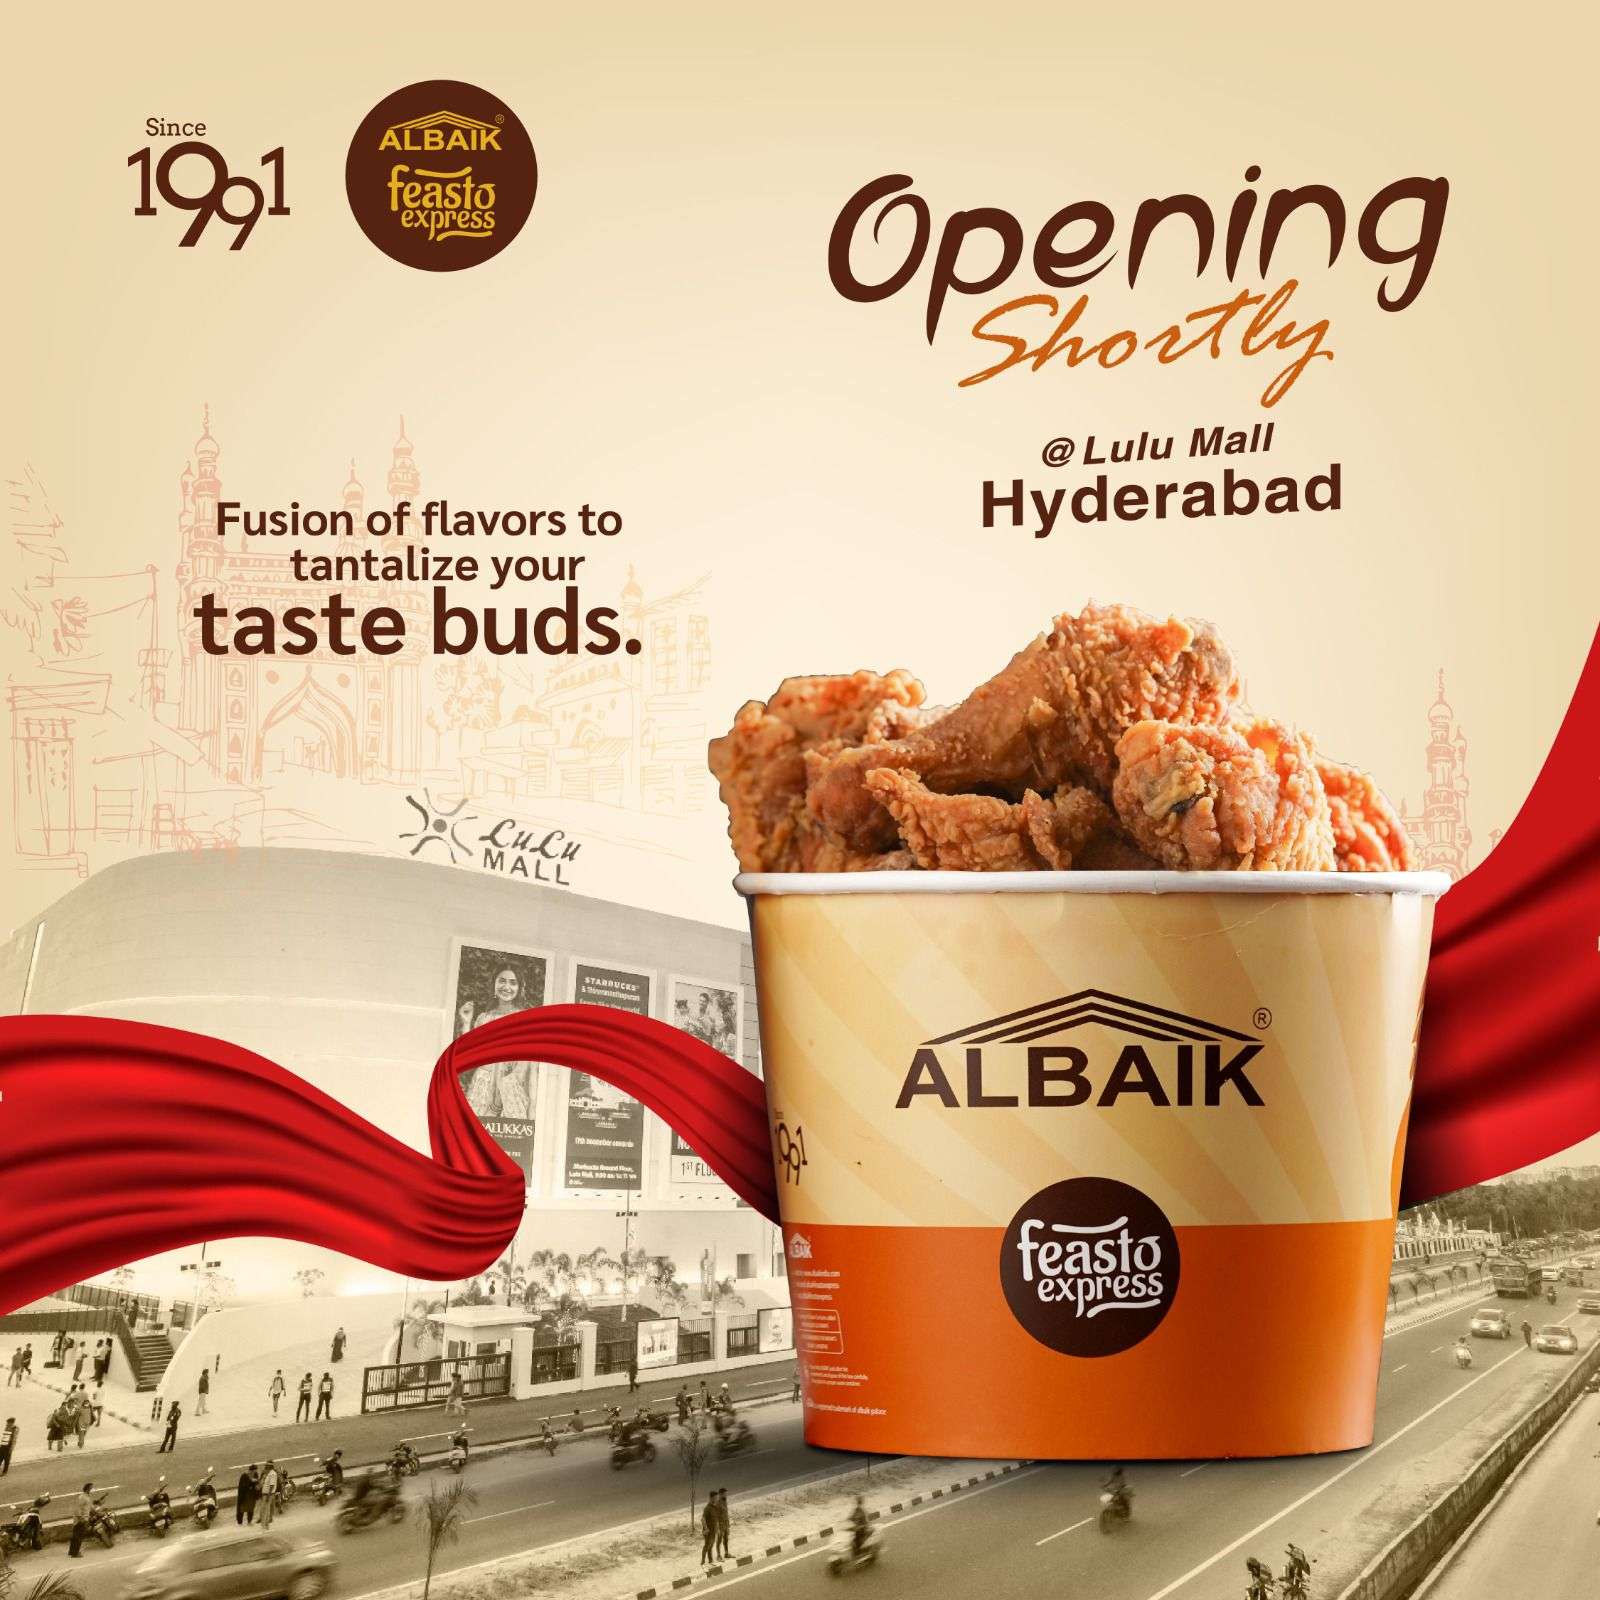 Our new Albaik outlet opened @ Hyderabad Lulu Mall